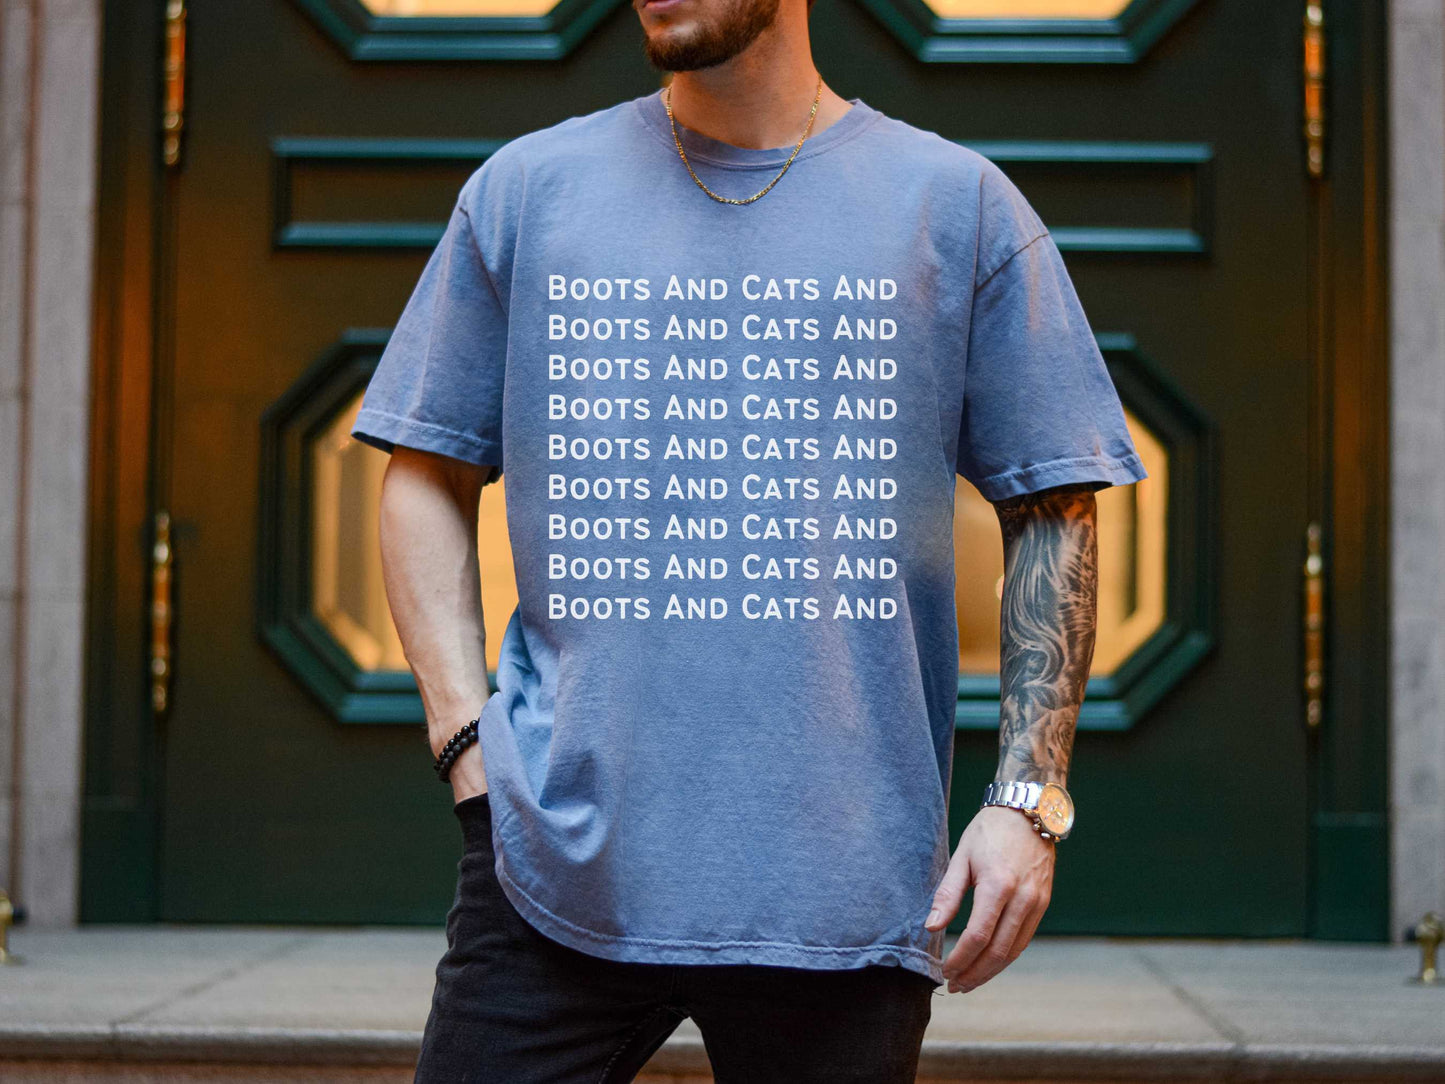 Funny Beatboxing "Boots And Cats" T-Shirt in Blue Jean